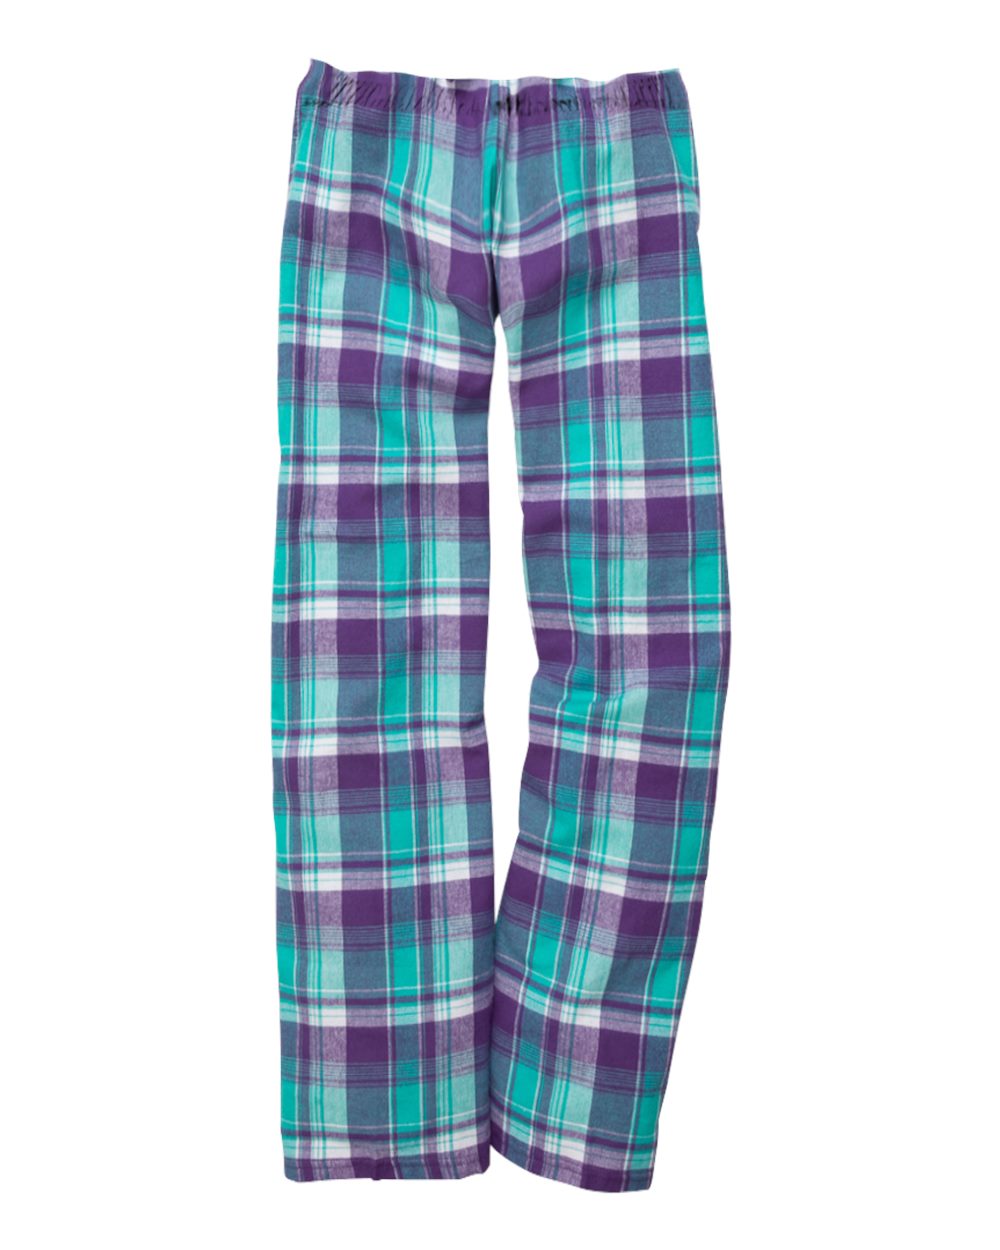 Boxercraft Y20 - Youth Flannel Pants with Pockets